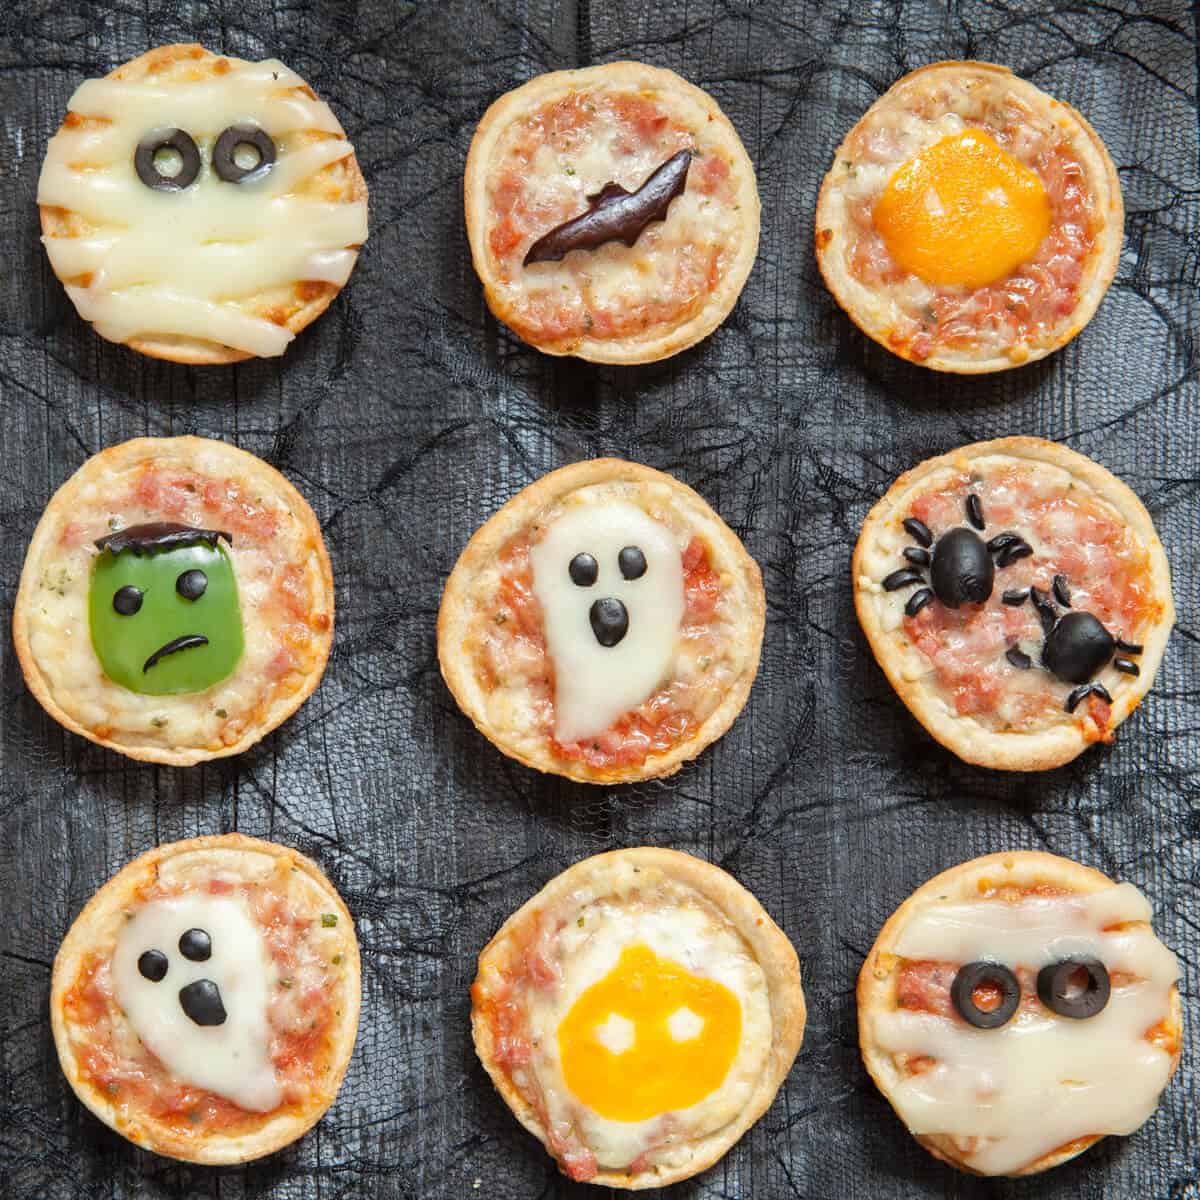 Overhead view of 12 pizzas that have been decorated for Halloween with ghosts, spiders, a bat and other Halloween characters